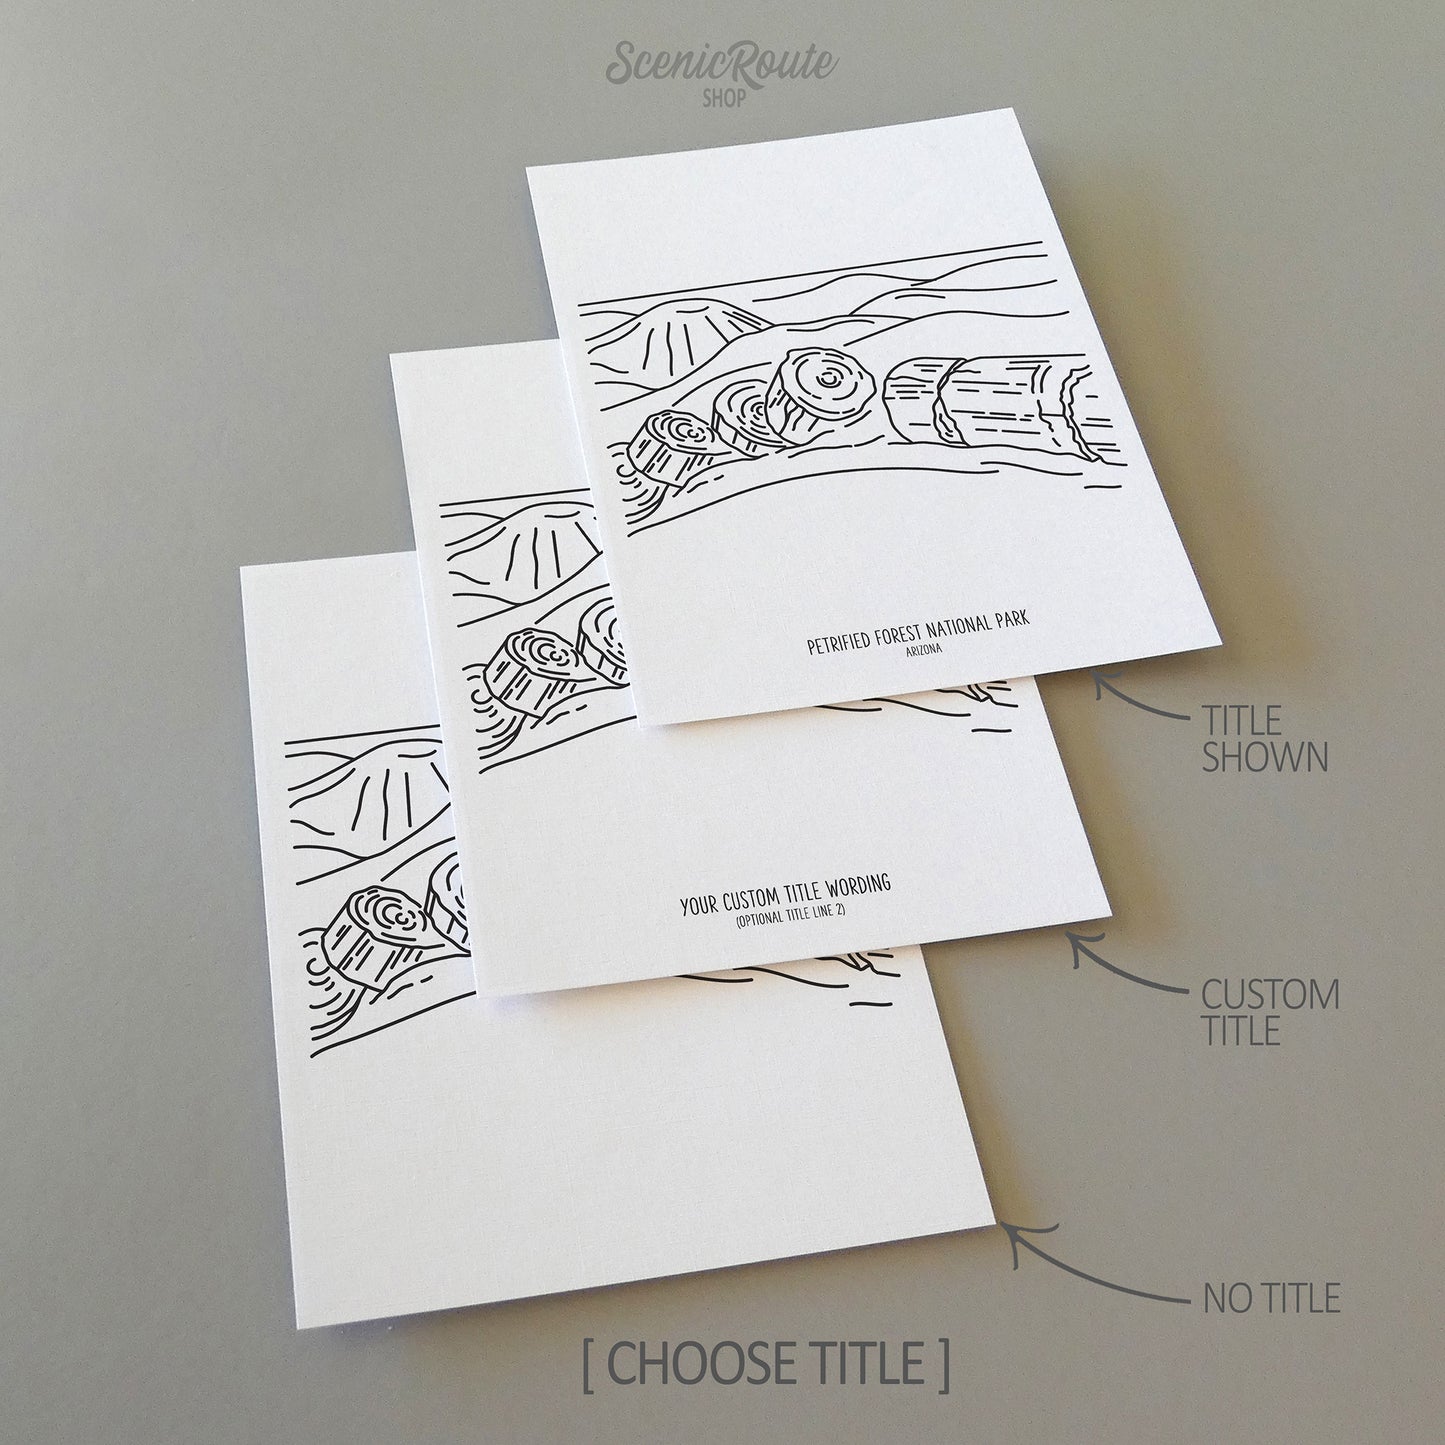 Three line art drawings of Petrified Forest National Park on white linen paper with a gray background. The pieces are shown with title options that can be chosen and personalized.